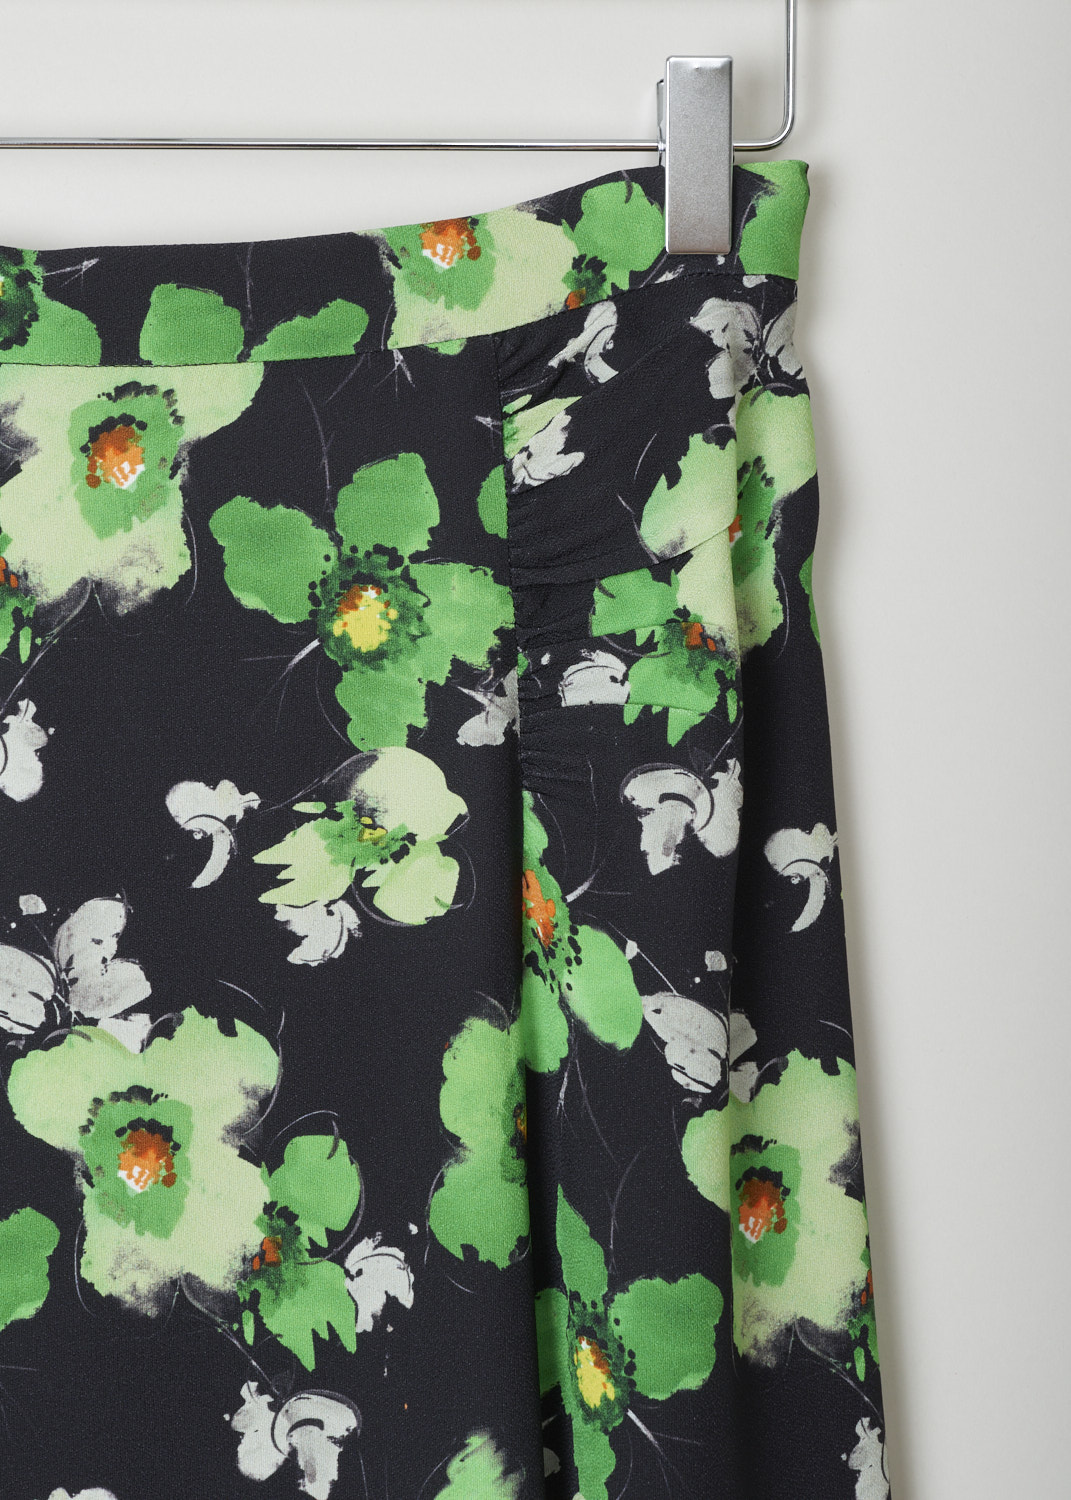 Prada, Black semi-circular skirt with green floral motif, sable_raso_narc_P152S_F077U_smeraldo, print, detail, Starting from the top this mid-length skirt comes with a narrow waistband, with the fastening option being on the left side. The seams coming of the waistband are ruched and adds more excitement to this model. Furthermore, this model does flare out, and has a short split on the back.